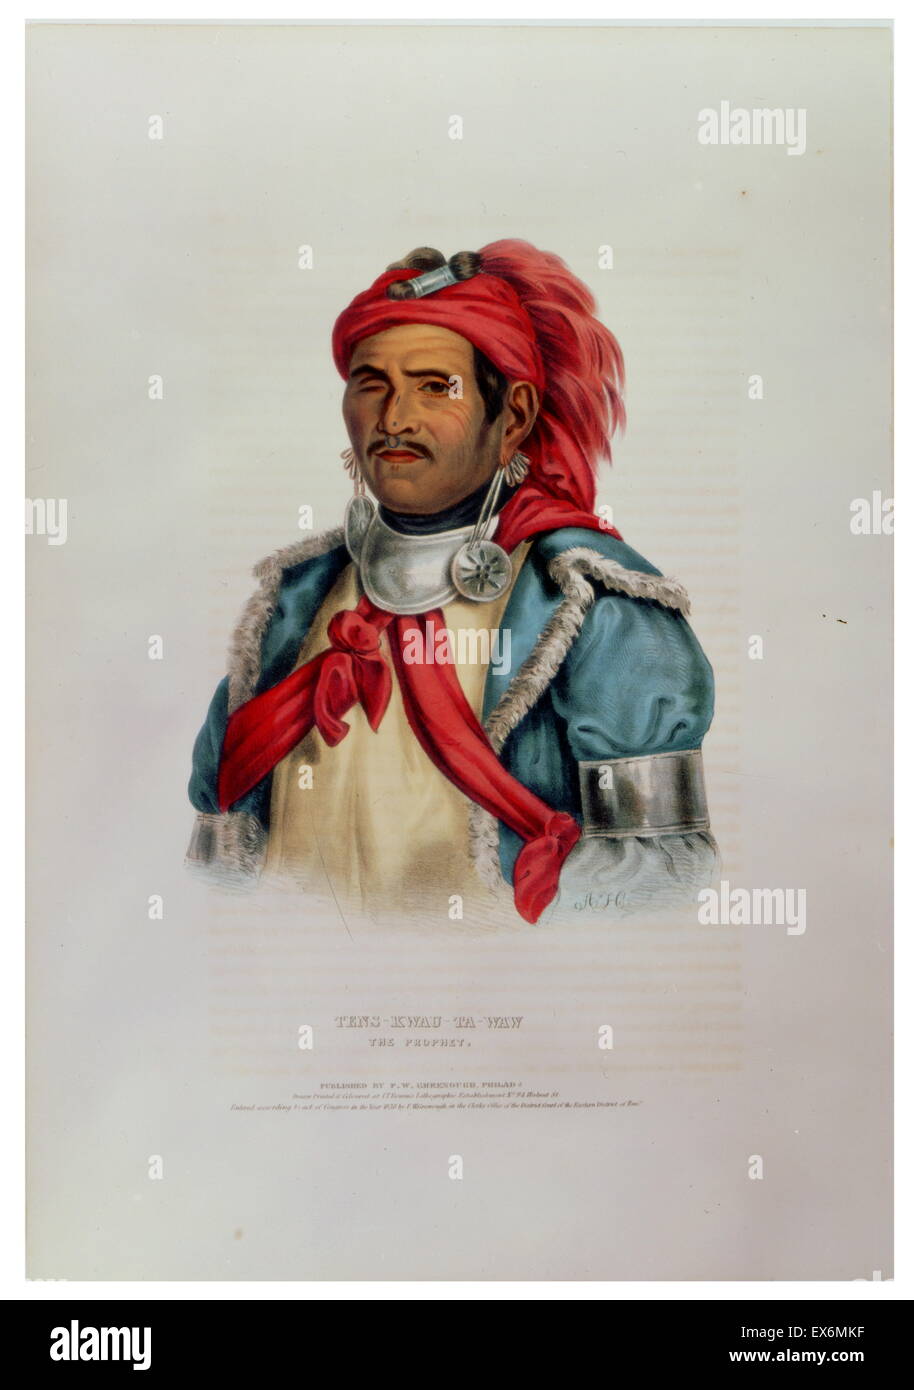 Tens-Kwau-Ta-Waw, the prophet, wearing head-scarf, earrings and metal armbands. He was the half brother of Shawnee leader Tecumseh and was active in organizing the First Nations against the Americans. Stock Photo